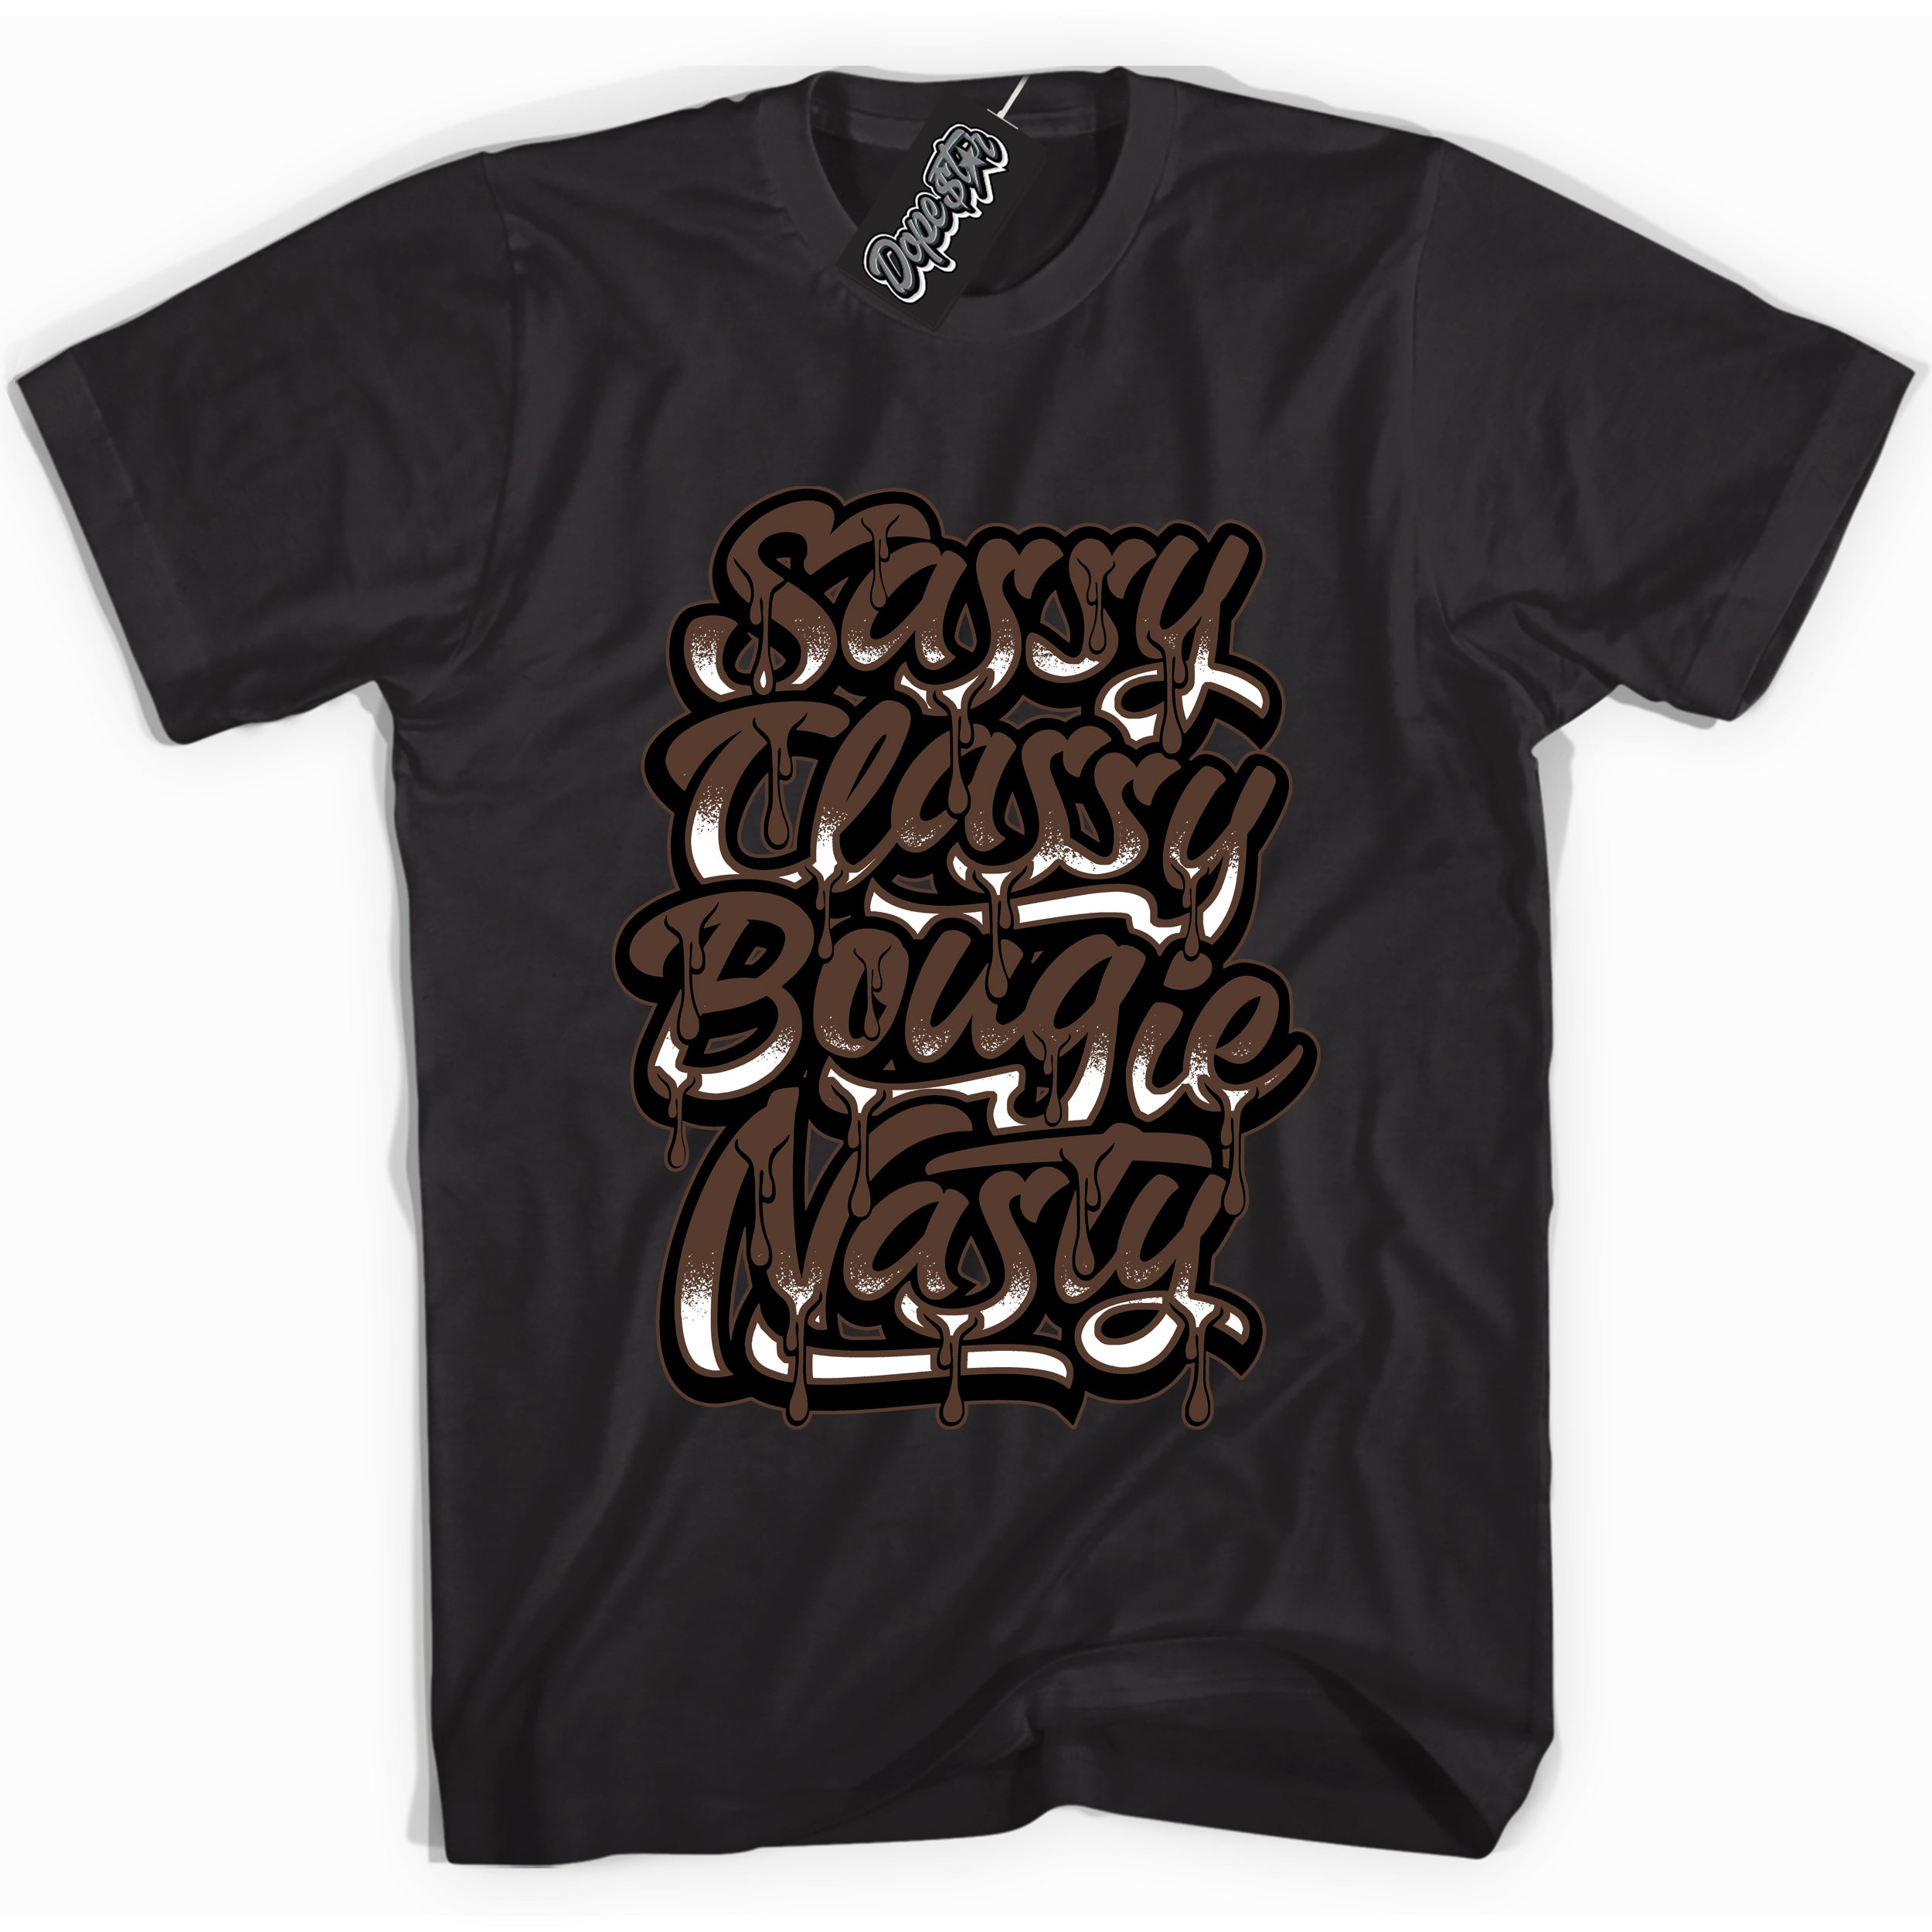 Cool Black graphic tee with “ Sassy Classy ” design, that perfectly matches Palomino 1s sneakers 